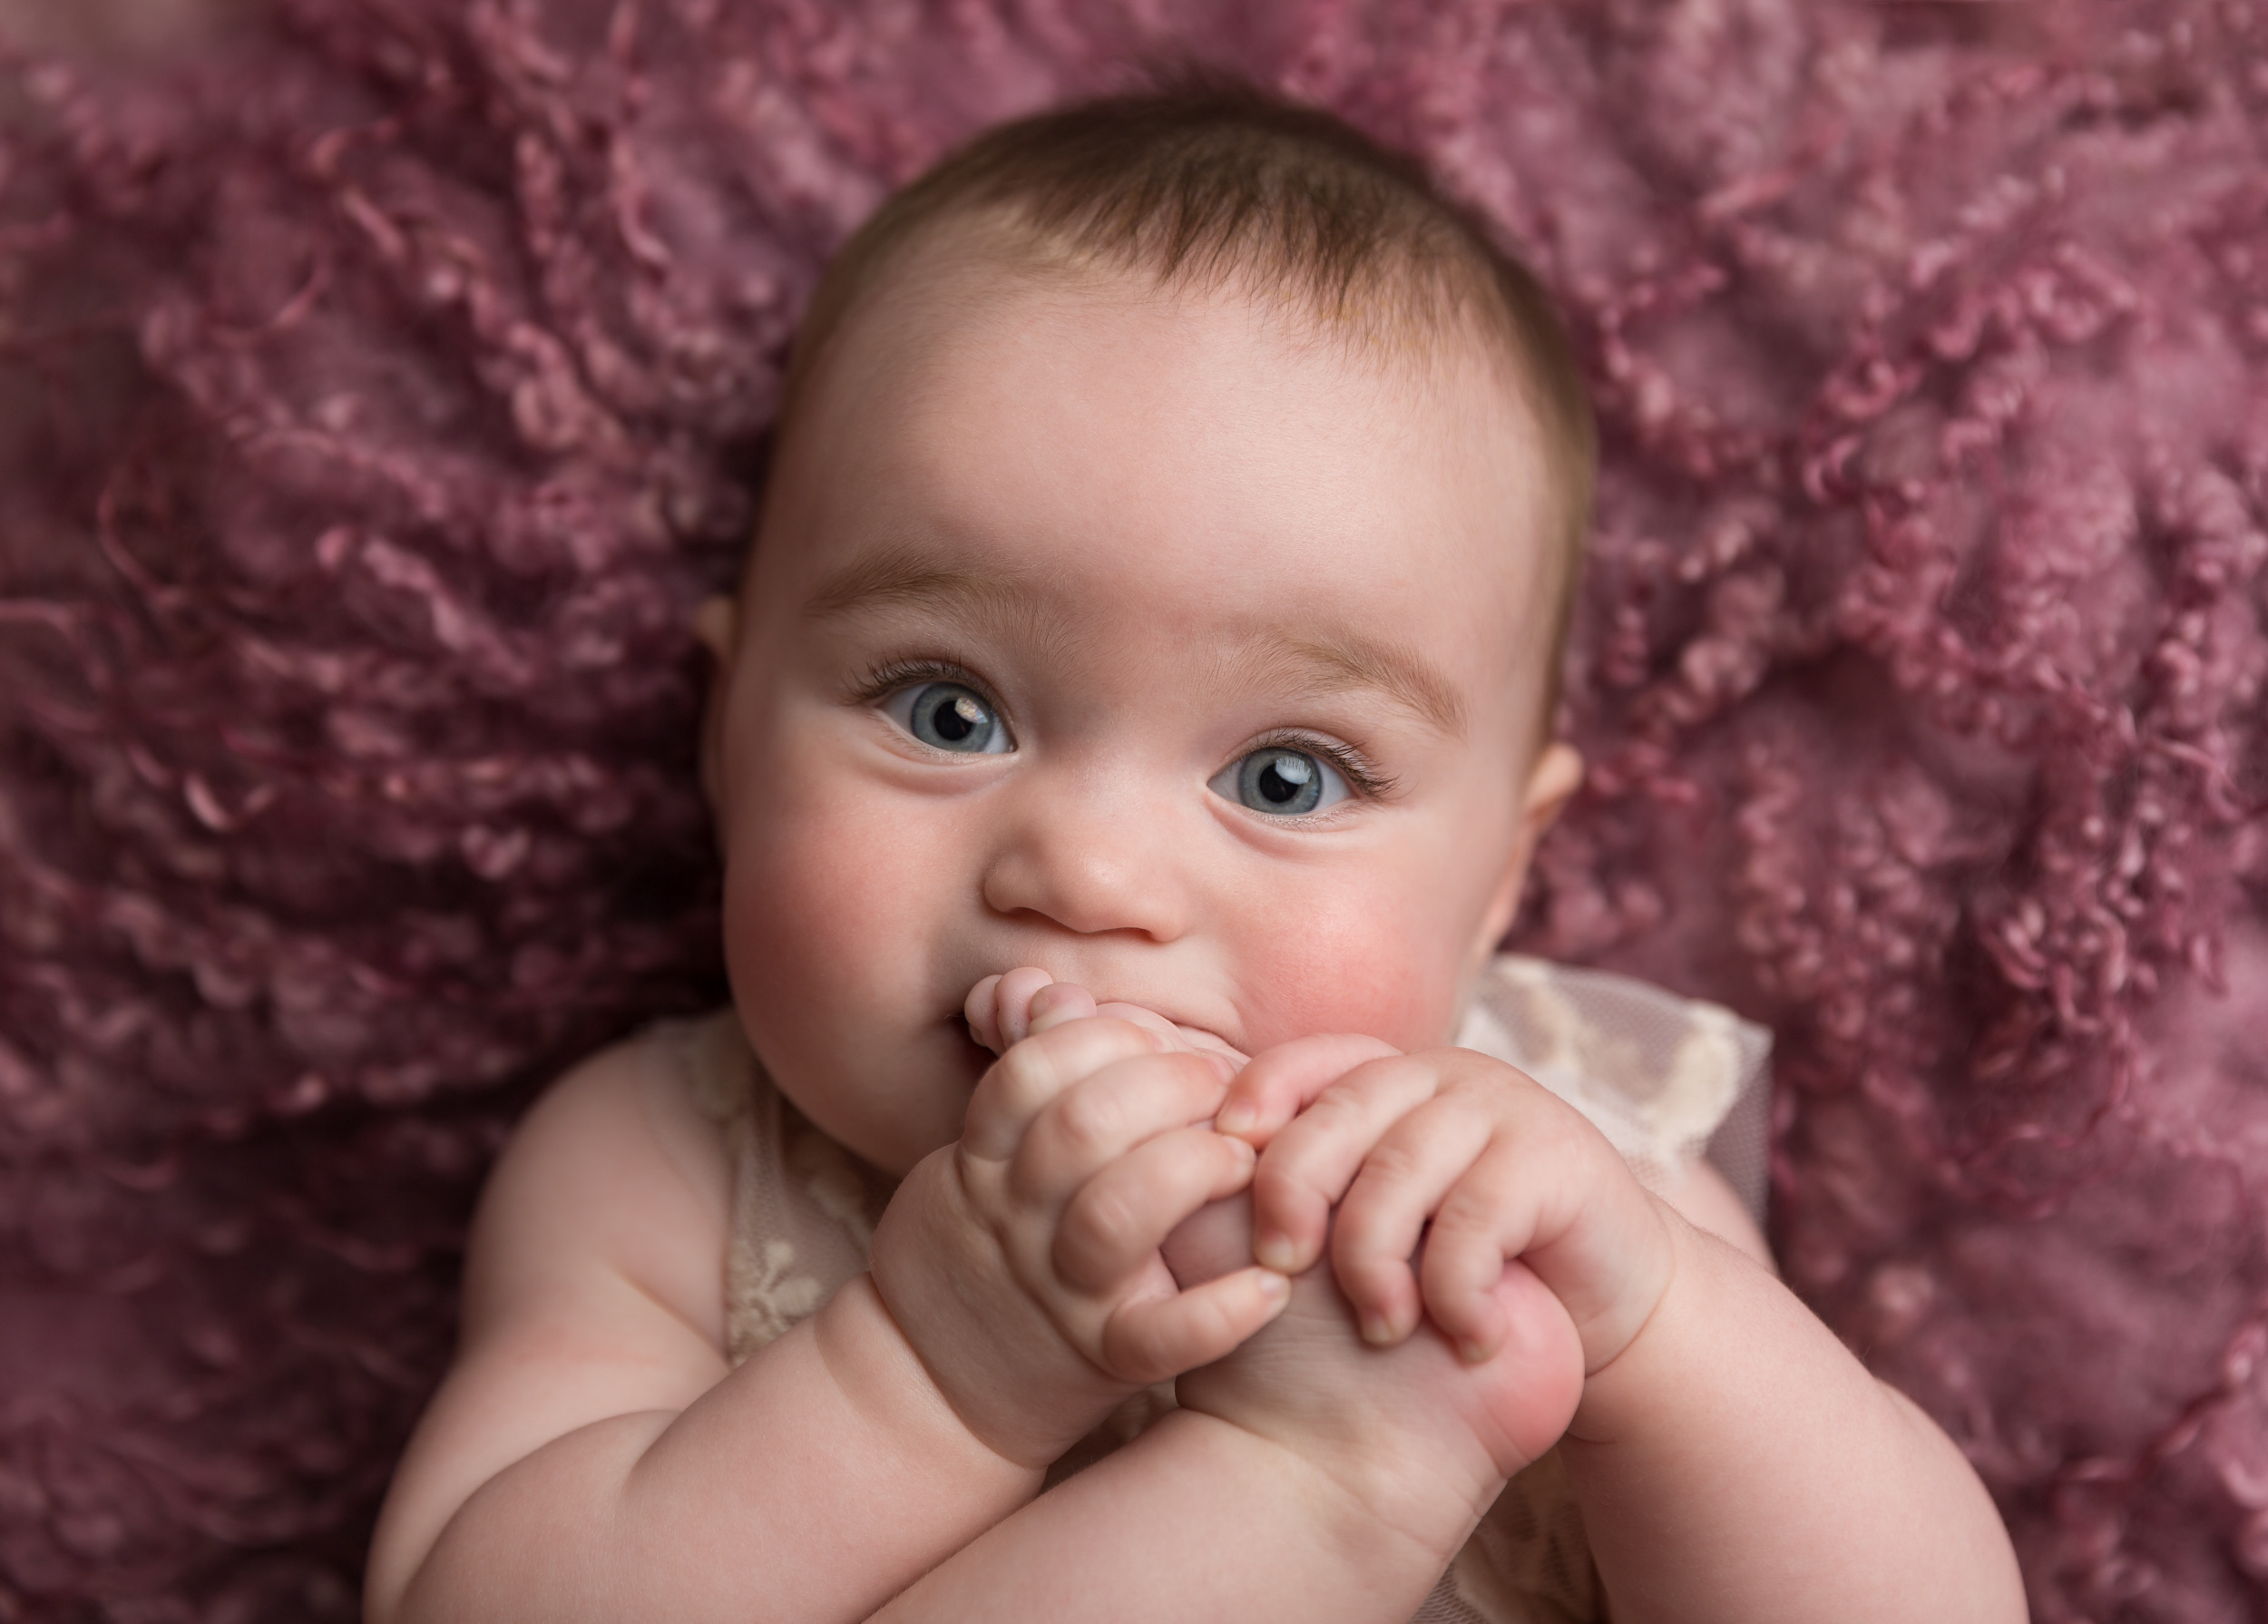 Little baby girl chewing her foot taken during a milestone portrait session in Sandbach, Cheshire